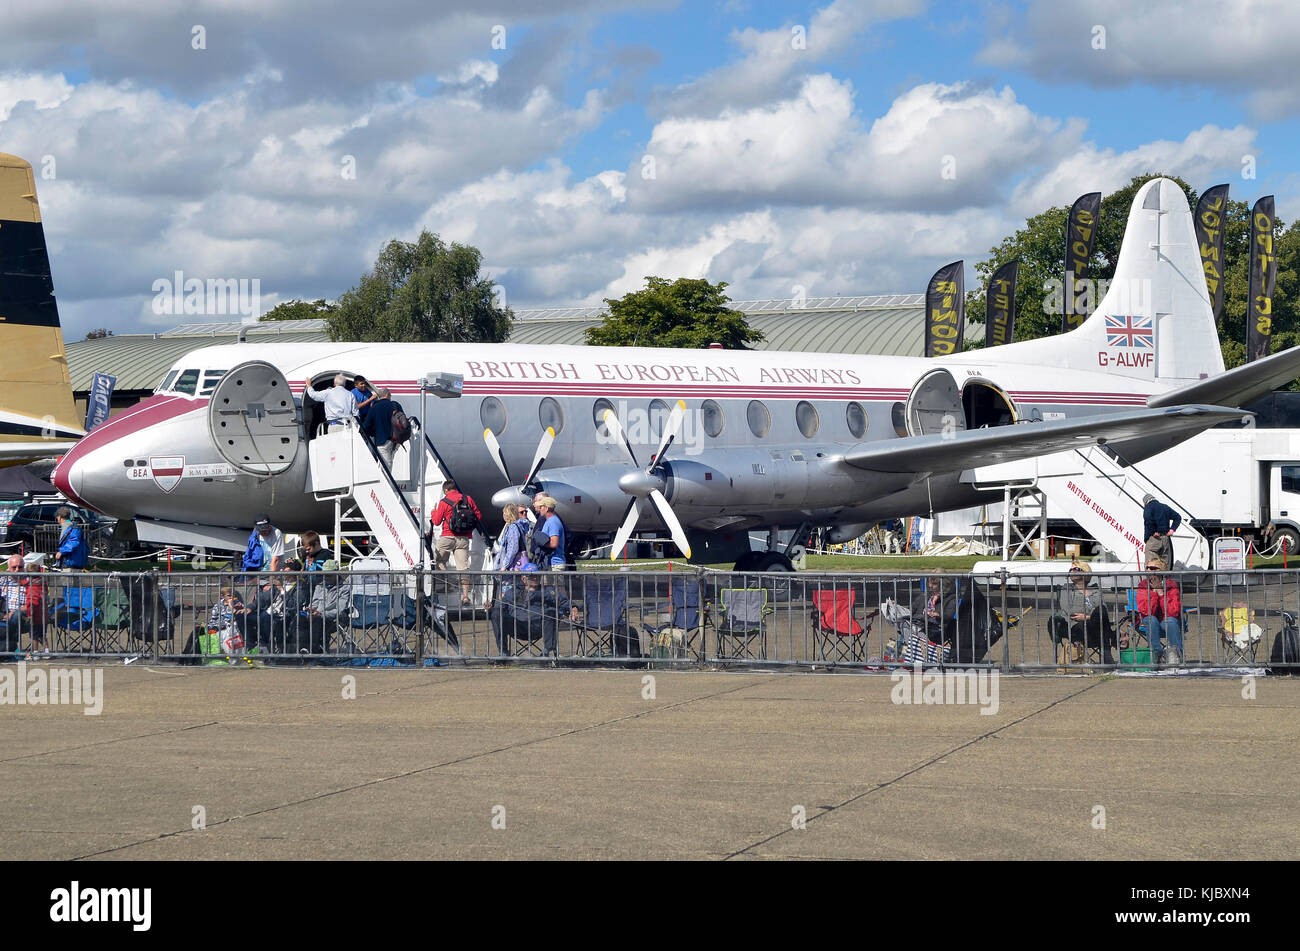 Vickers Viscount, British European Airways, Duxford, UK. Vickers V701 Viscount was flown by BEA from 1953 until 1963. Stock Photo